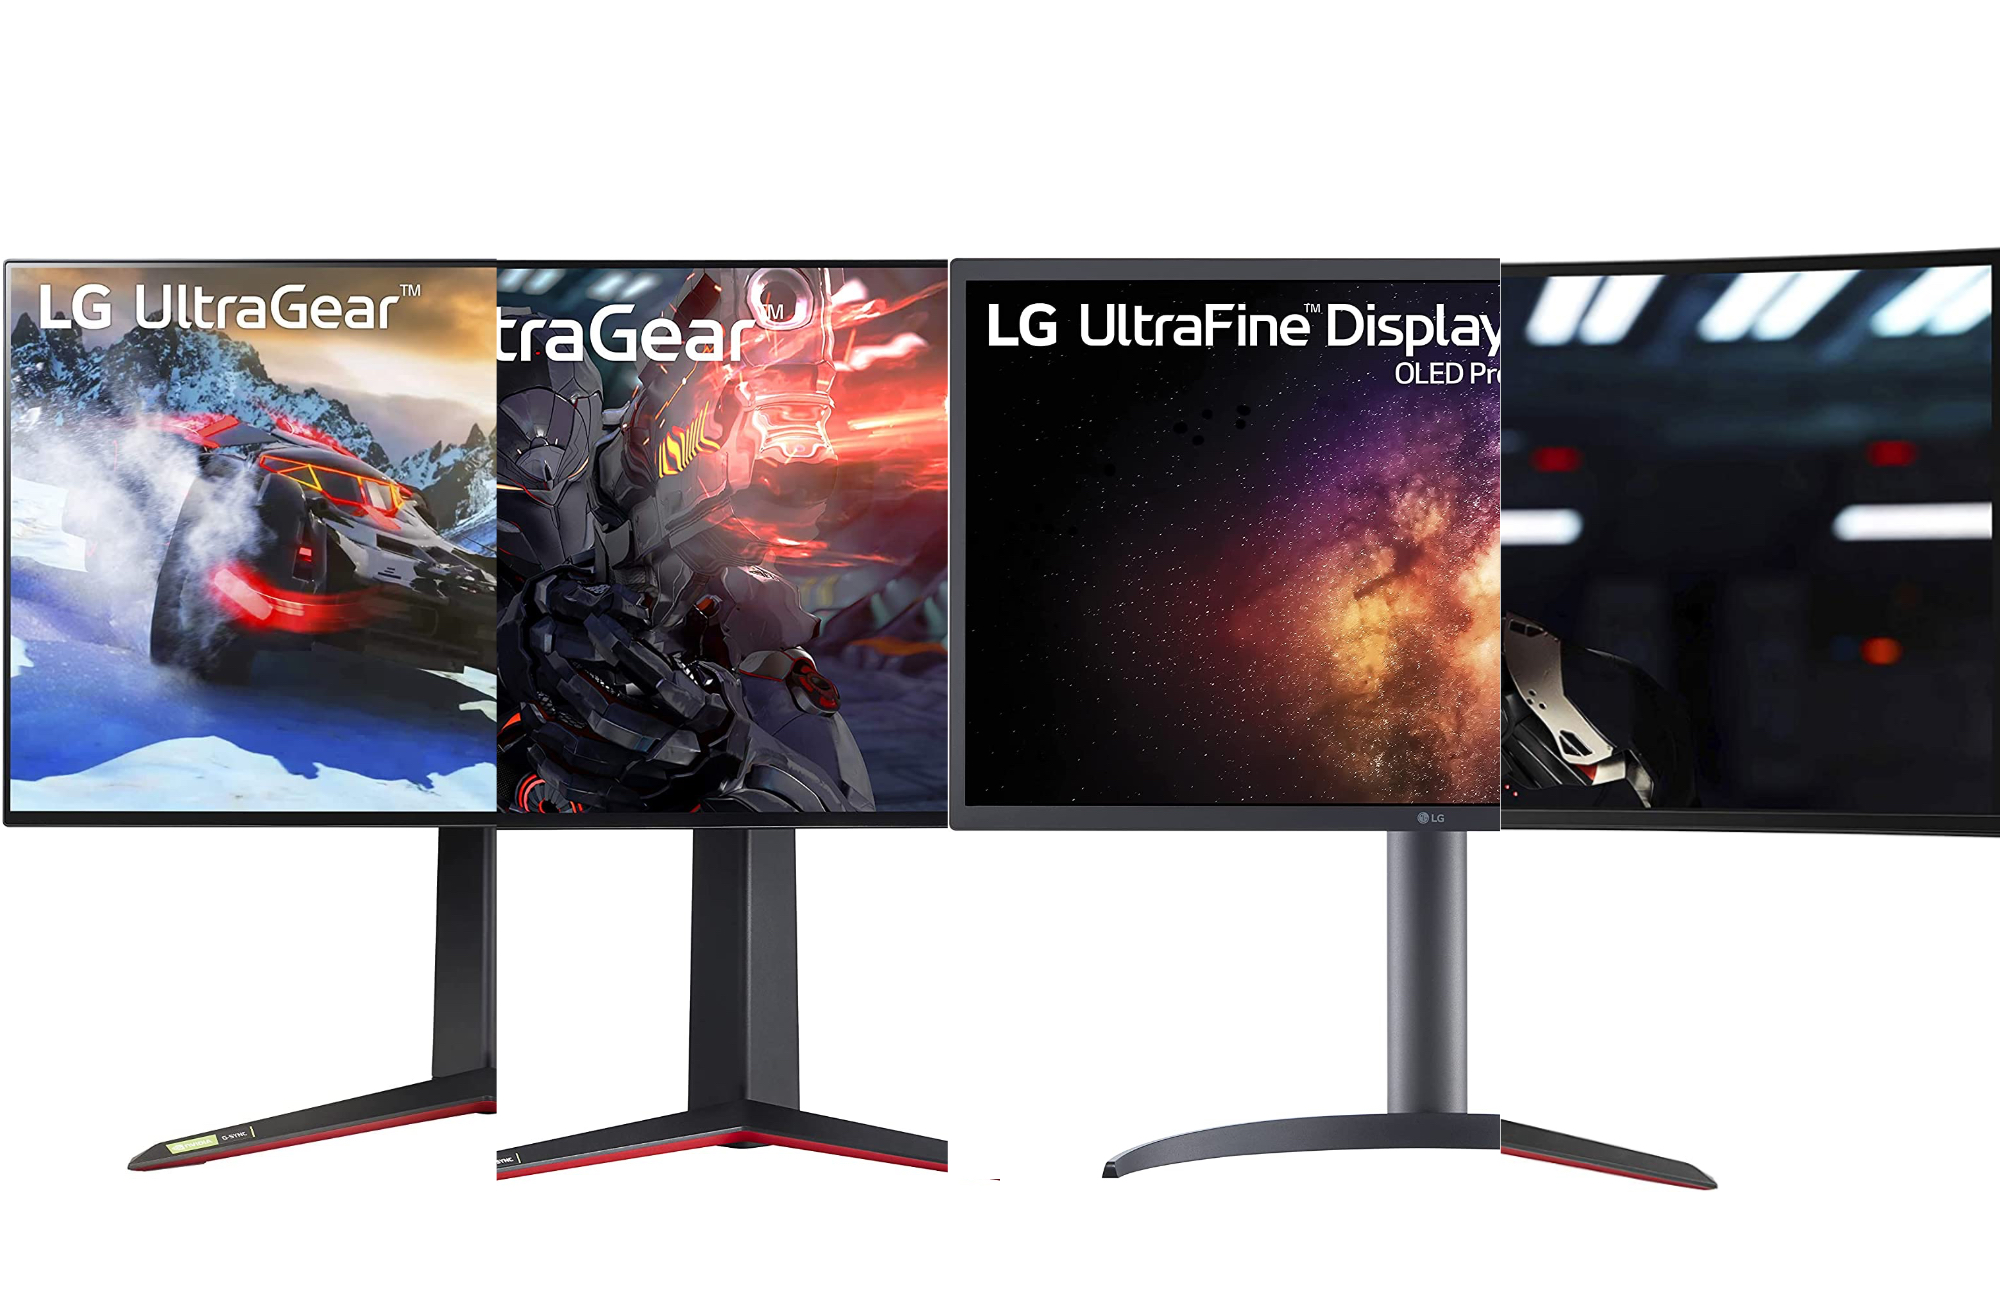 Your 1440p QHD monitor might be actually housing a 4K UHD panel